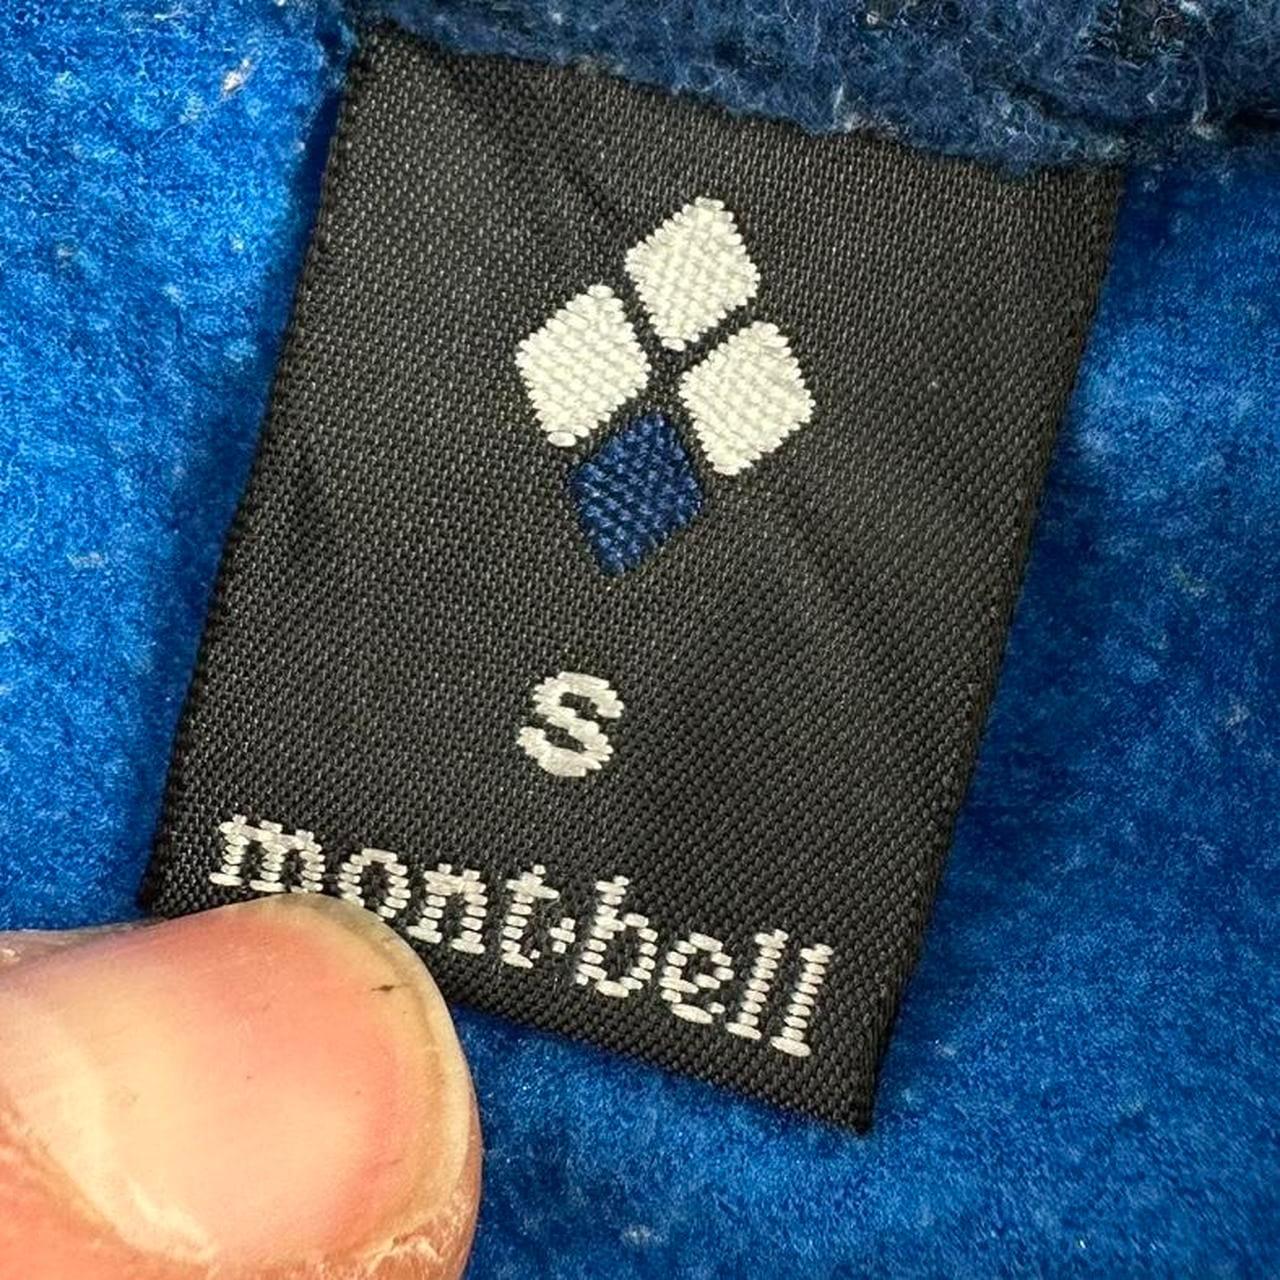 Montbell zip jacket woman’s size S - Known Source